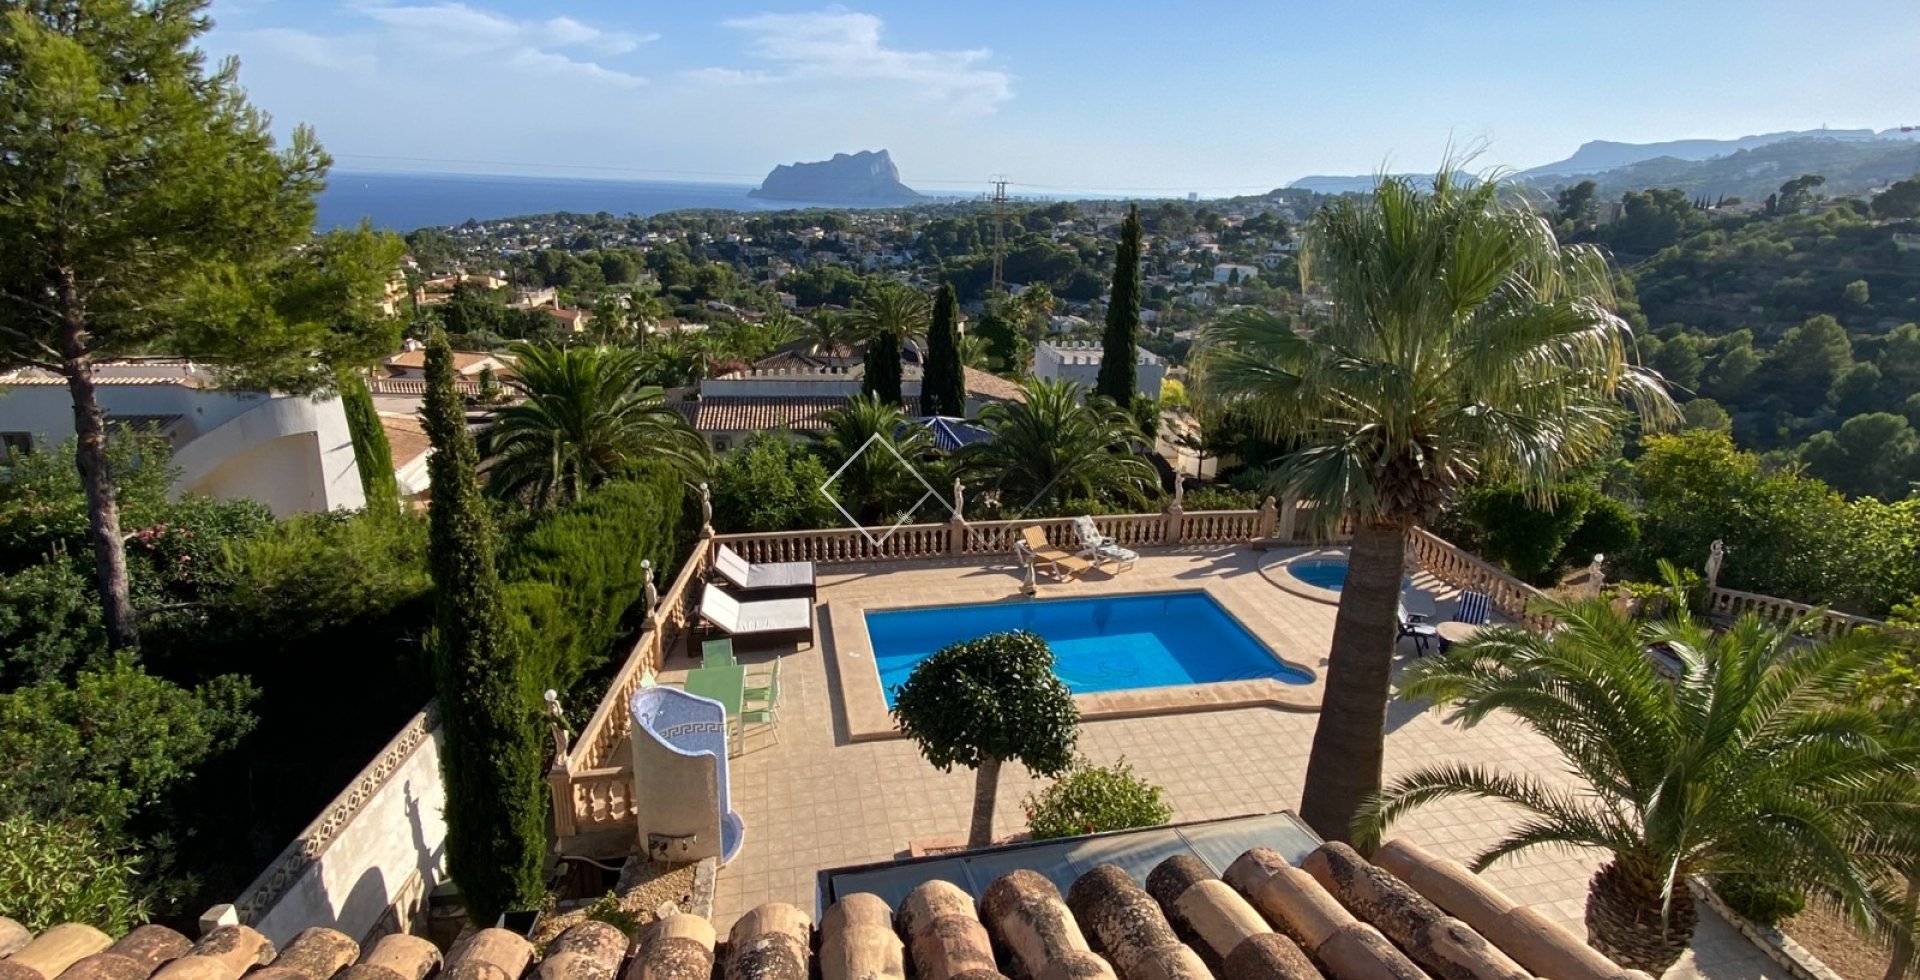 views- Large traditional villa in Benissa, San Jaime for sale with sea views from every room